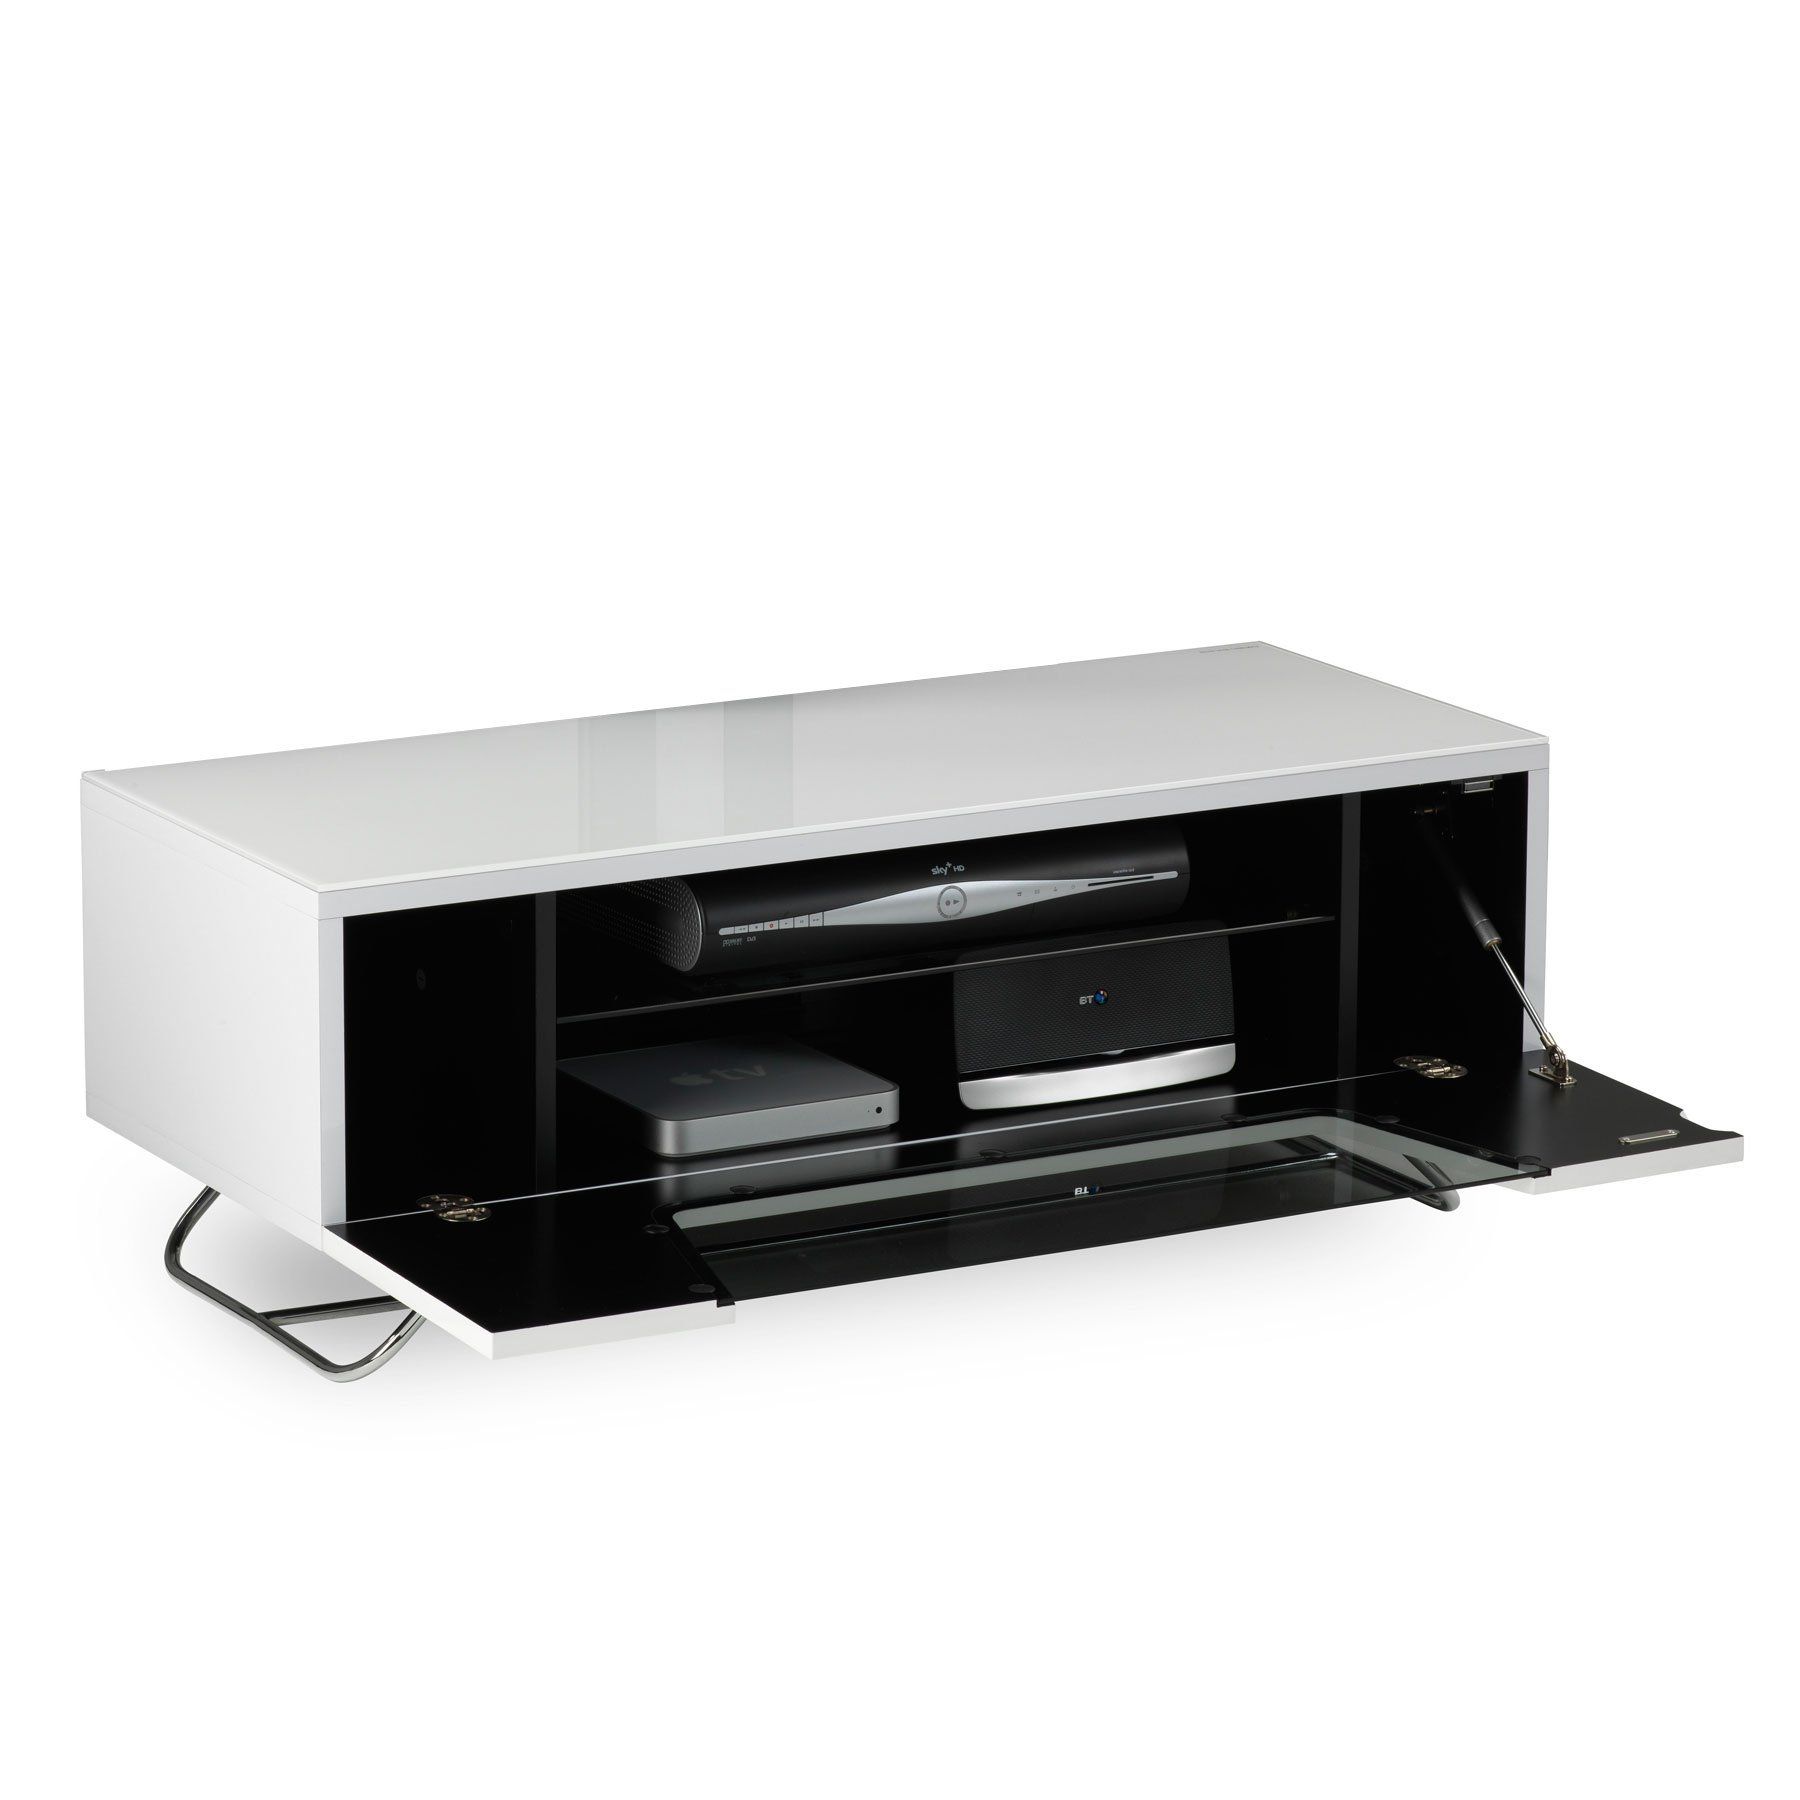 Alphason Chromium 2 100cm White Tv Stand For Up To 50" Tvs Pertaining To Tv Unit 100cm (View 8 of 15)